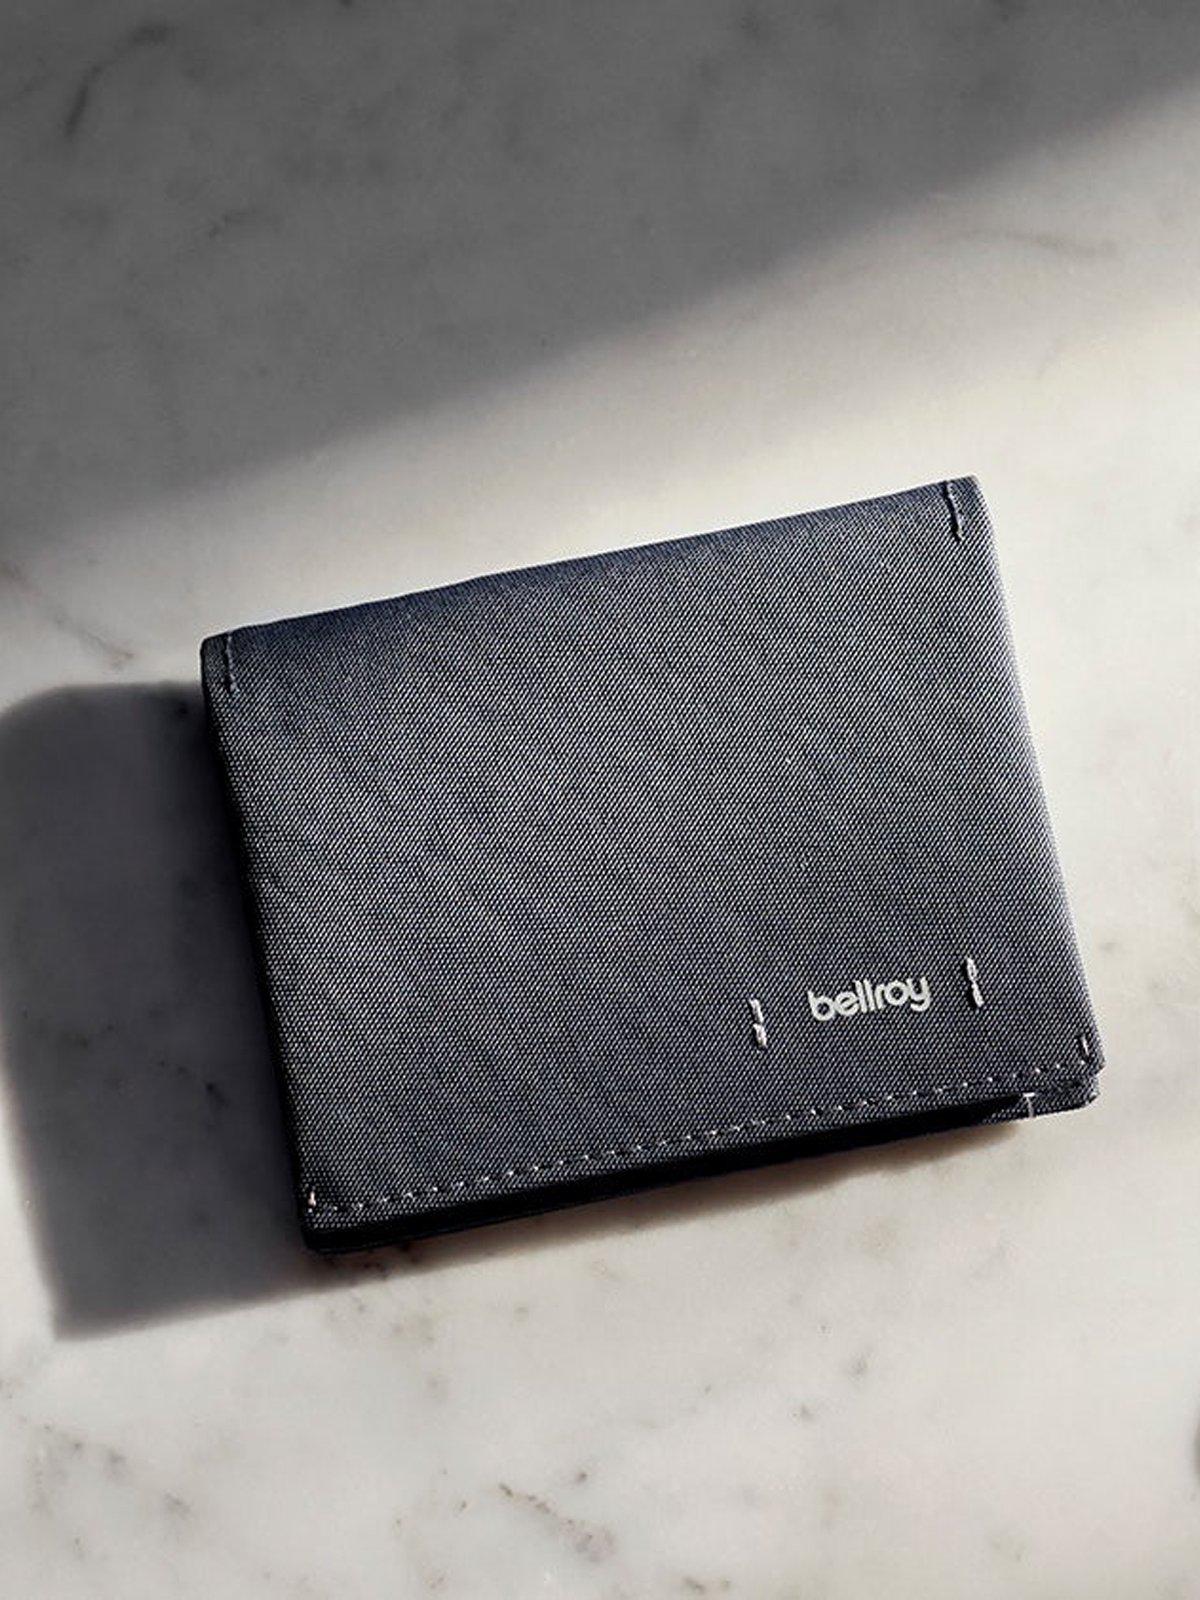 Bellroy Slim Sleeve Wallet Charcoal Woven (Leather-Free)